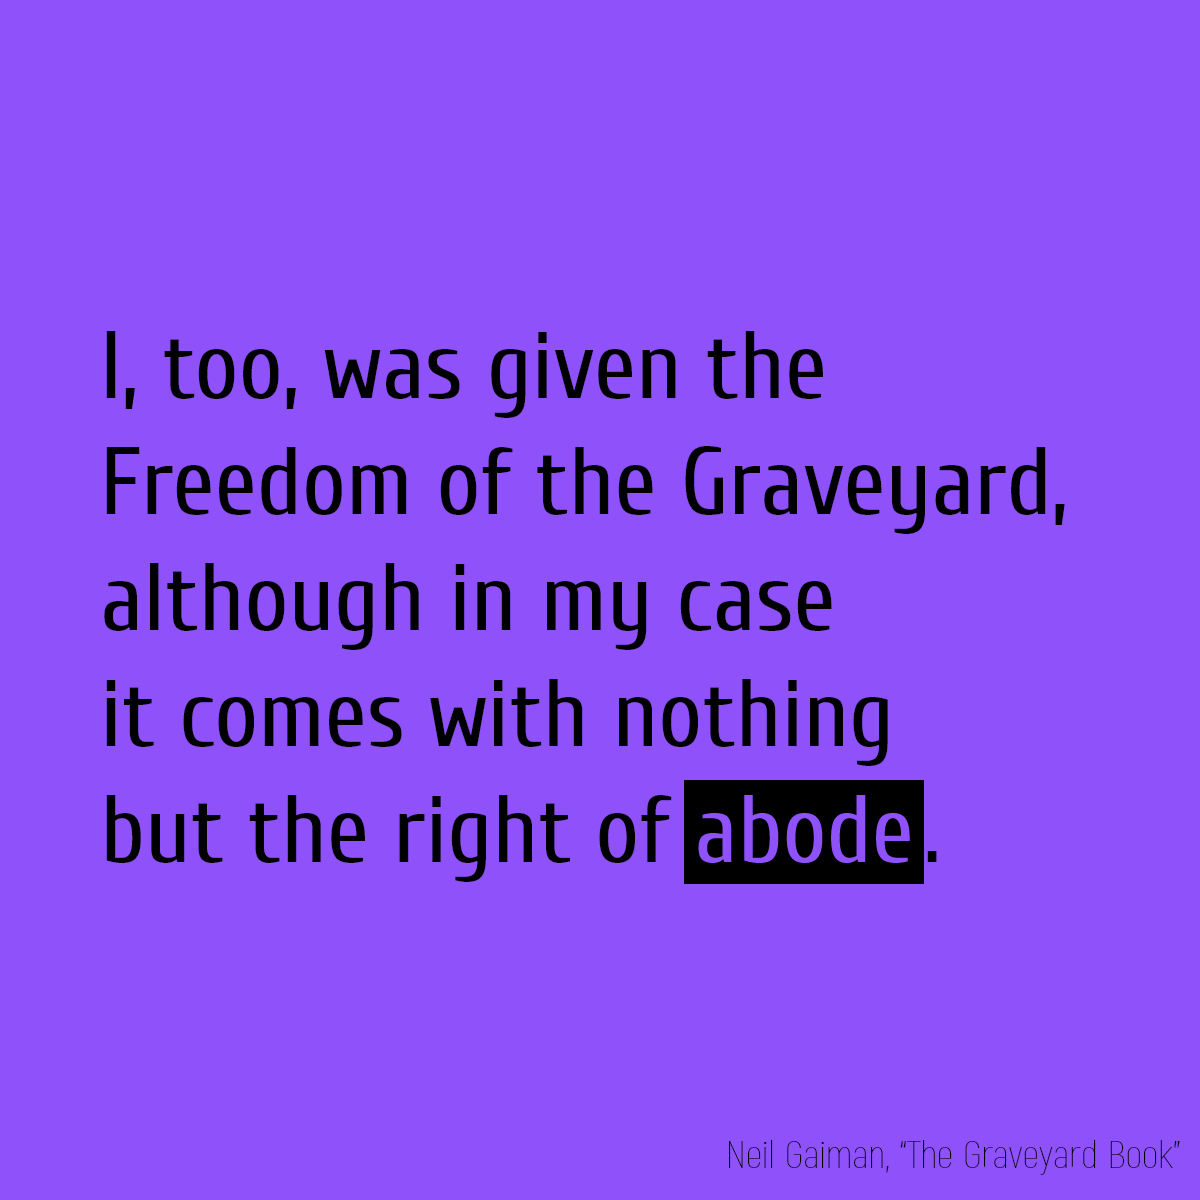 I, too, was given the Freedom of the Graveyard, although in my case it comes with nothing but the right of **abode**.’